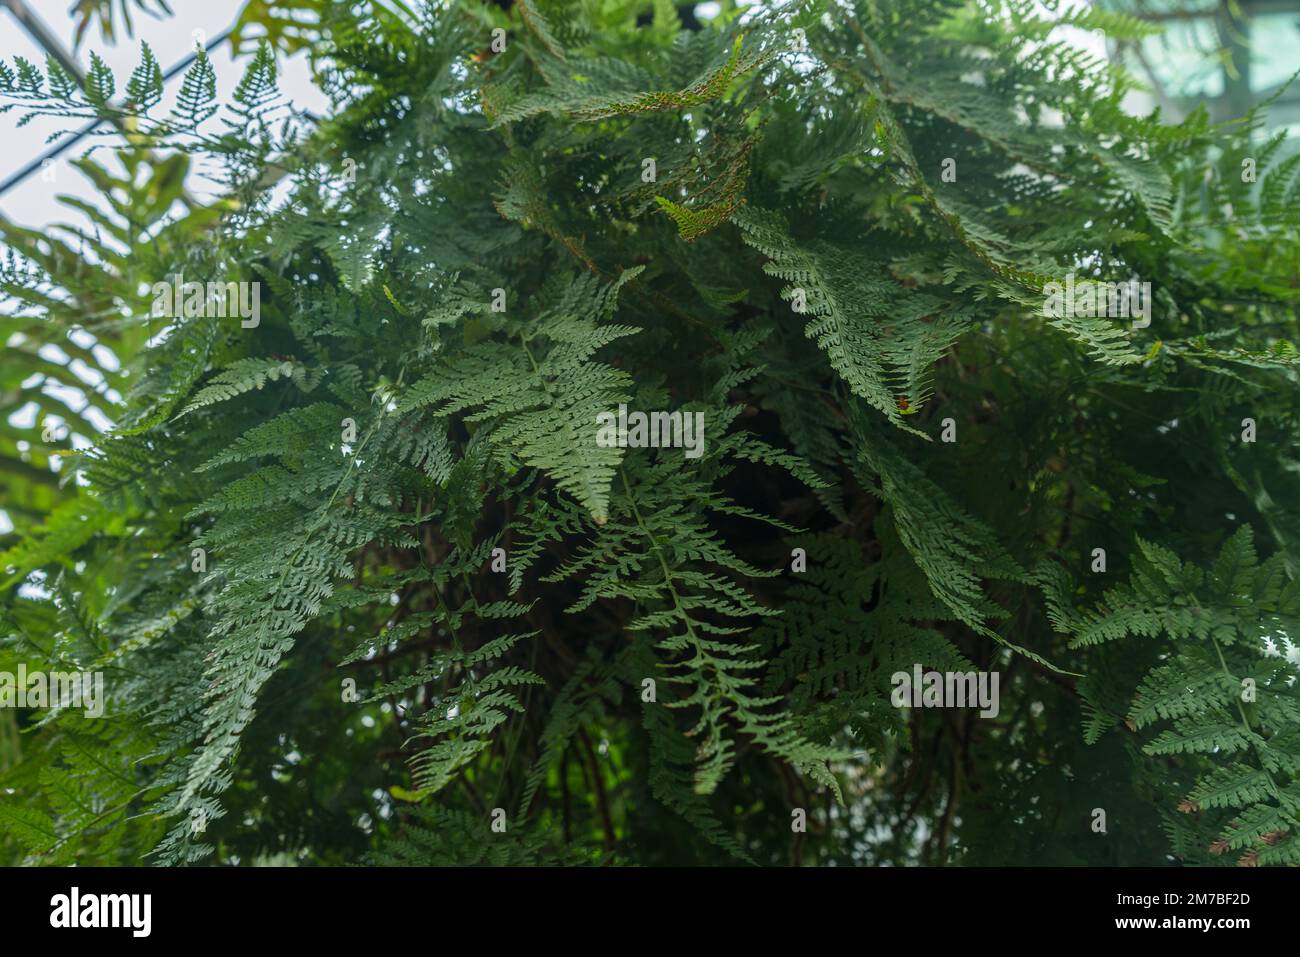 view from below on growing athyrium filix-femina or common ladyfern plant Stock Photo